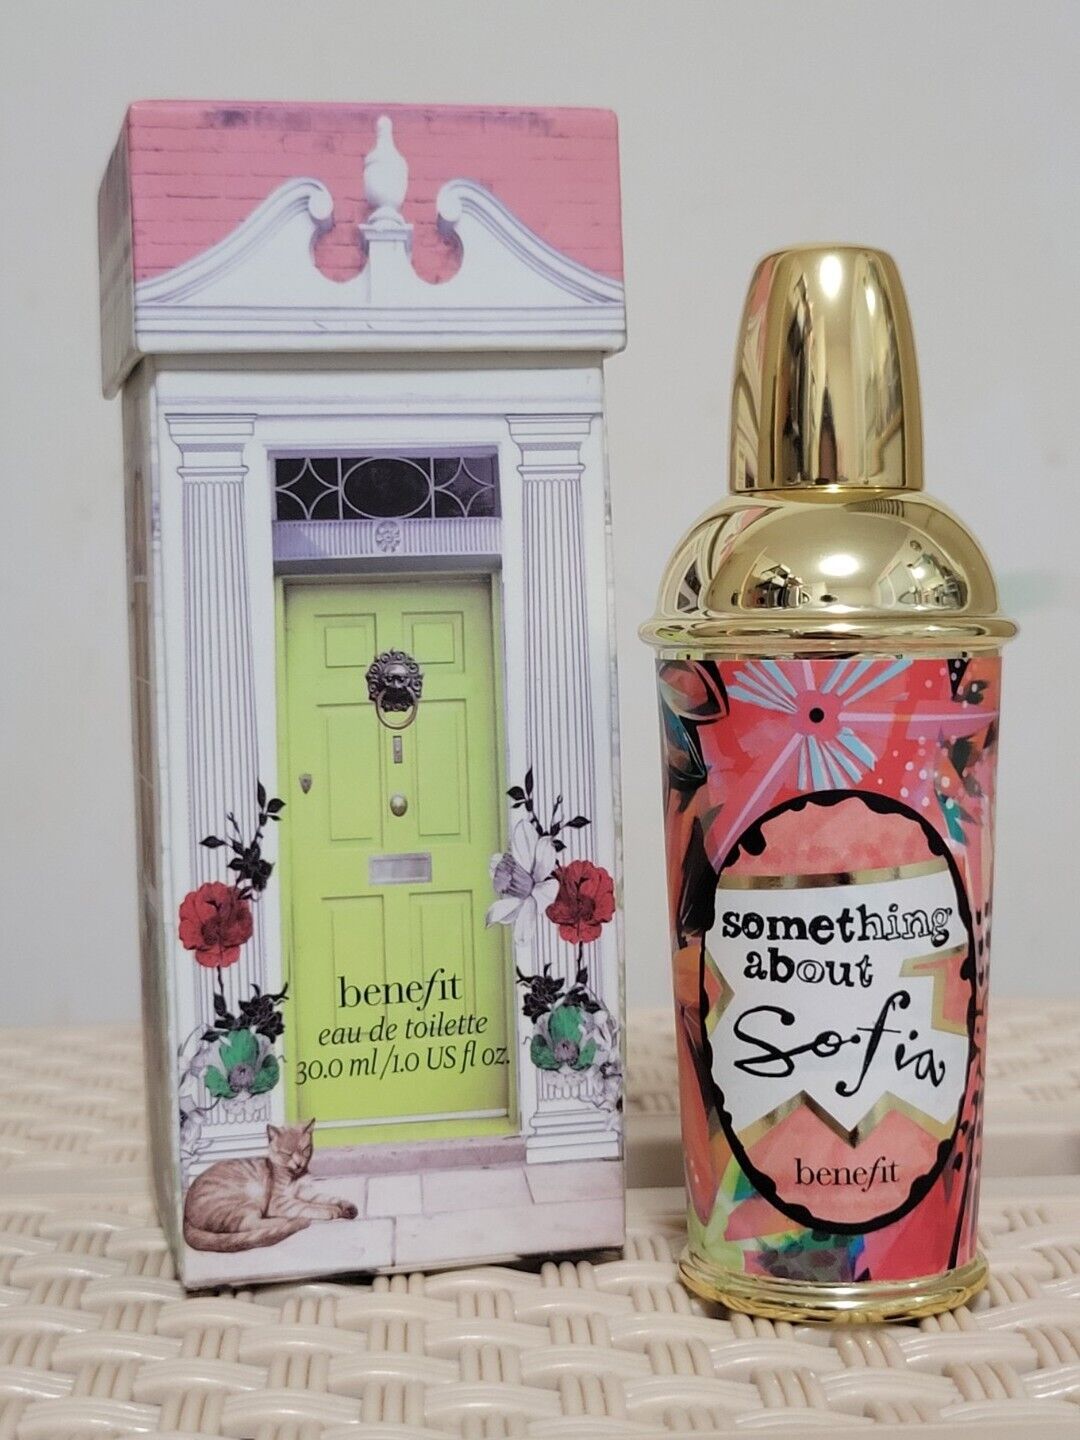 RARE Benefit There’s Something About Sofia 1oz EDT Perfume & Box DISCONTINUED